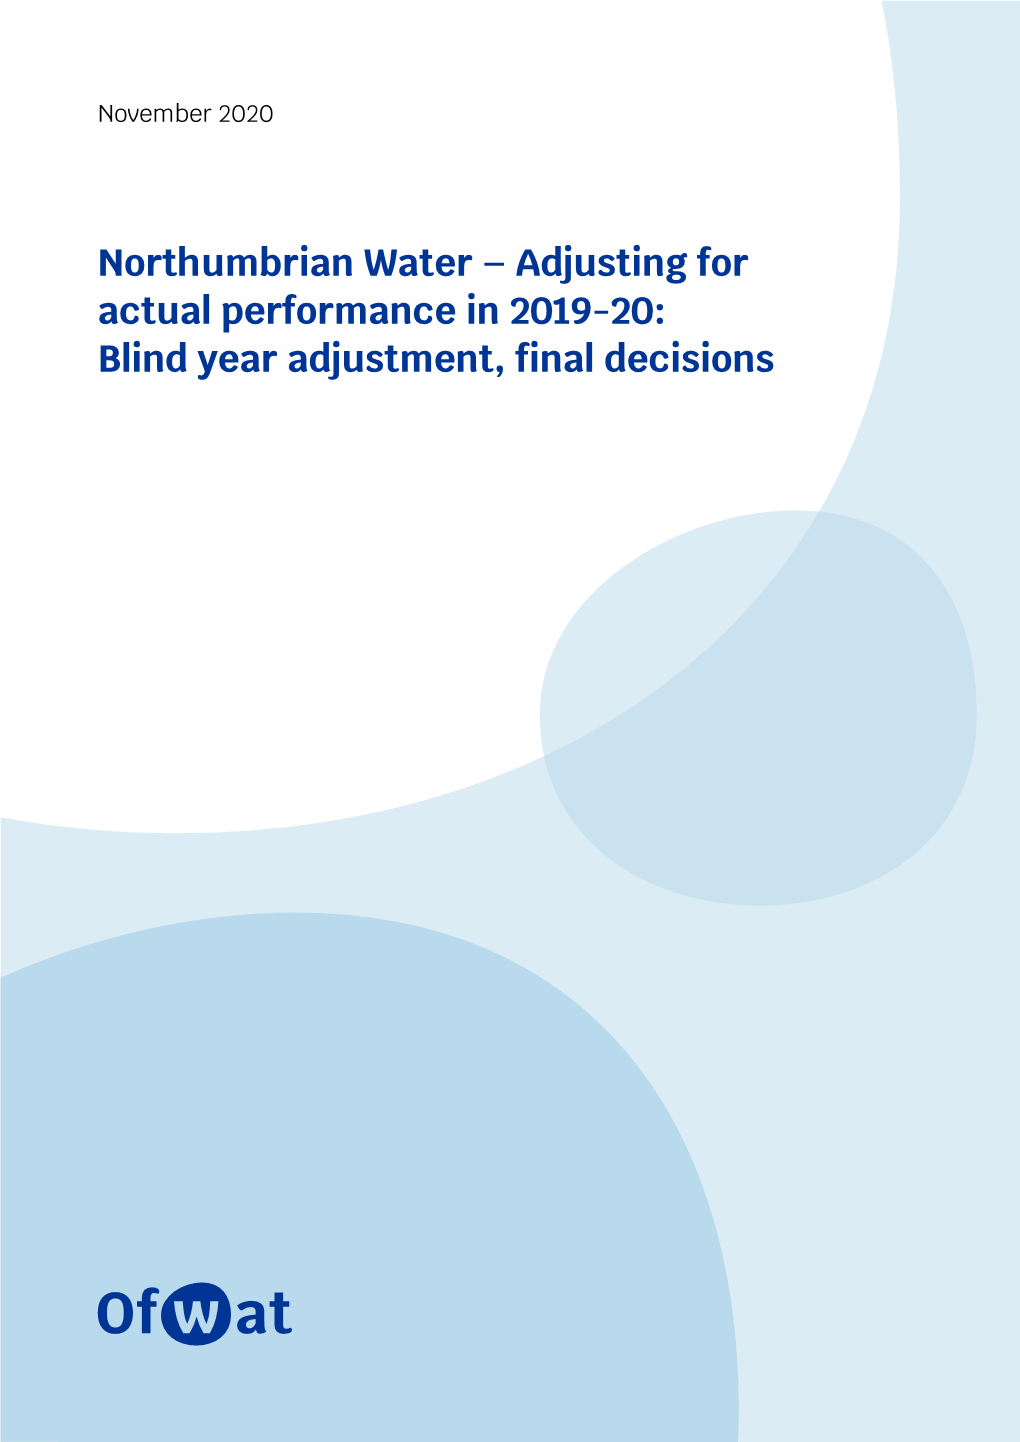 Northumbrian Water – Adjusting for Actual Performance in 2019-20: Blind Year Adjustment, Final Decisions Blind Year Adjustments, Final Decision, Northumbrian Water